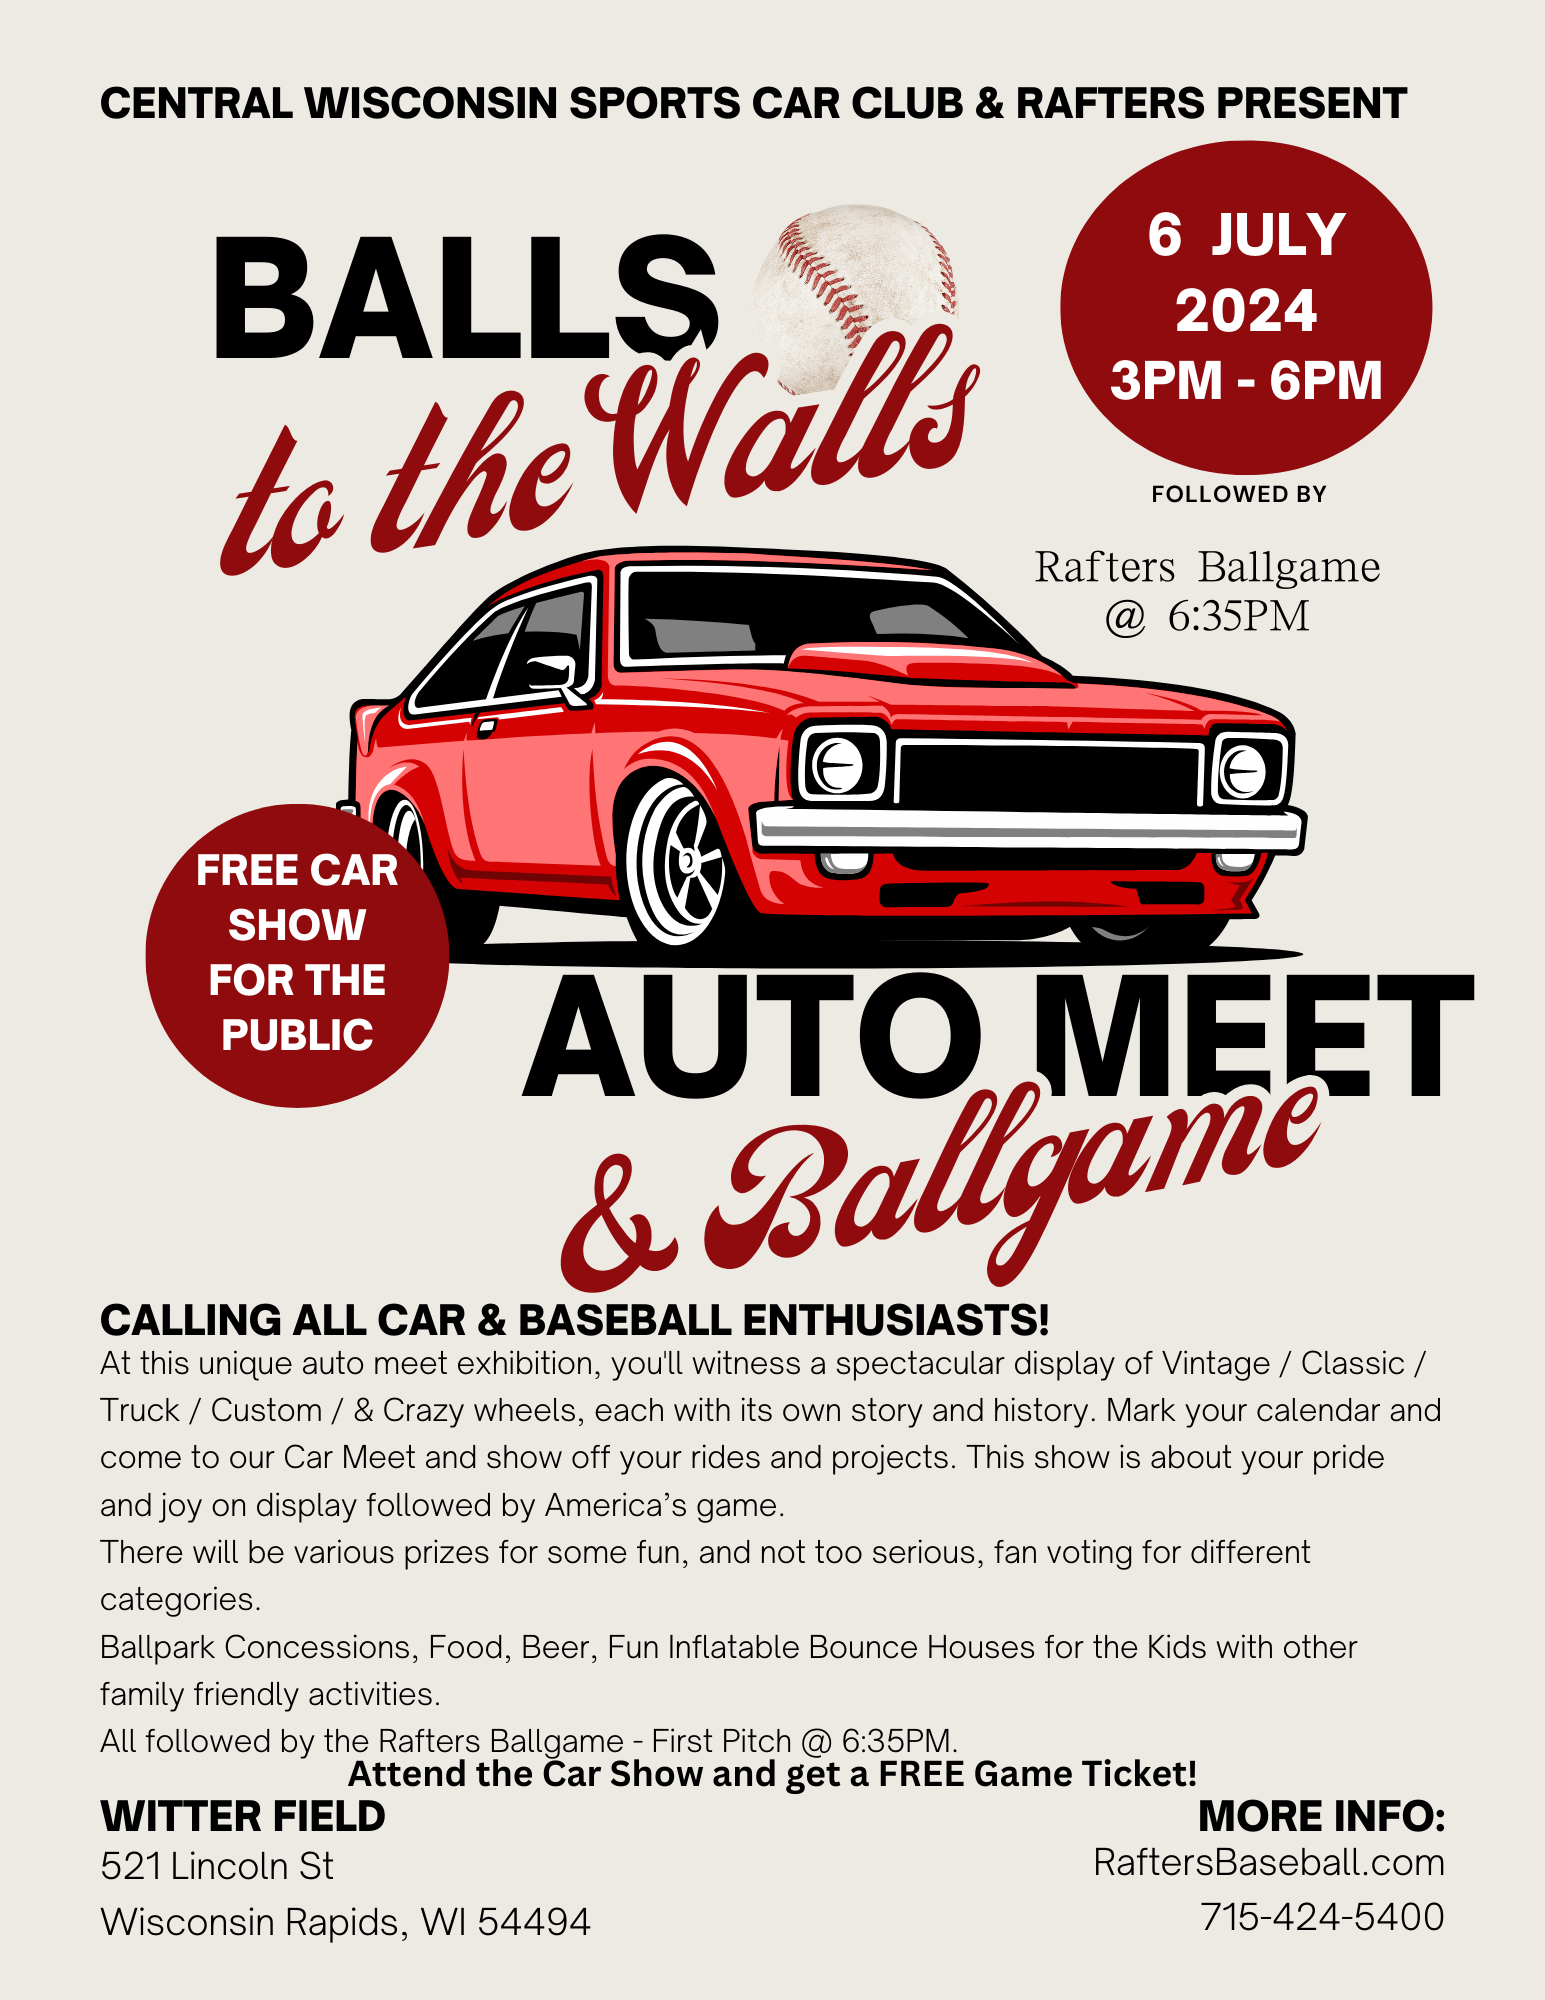 Central Wisconsin Sports Car Club and Rapids Rafters host “Balls to the Walls” car meet and ball game